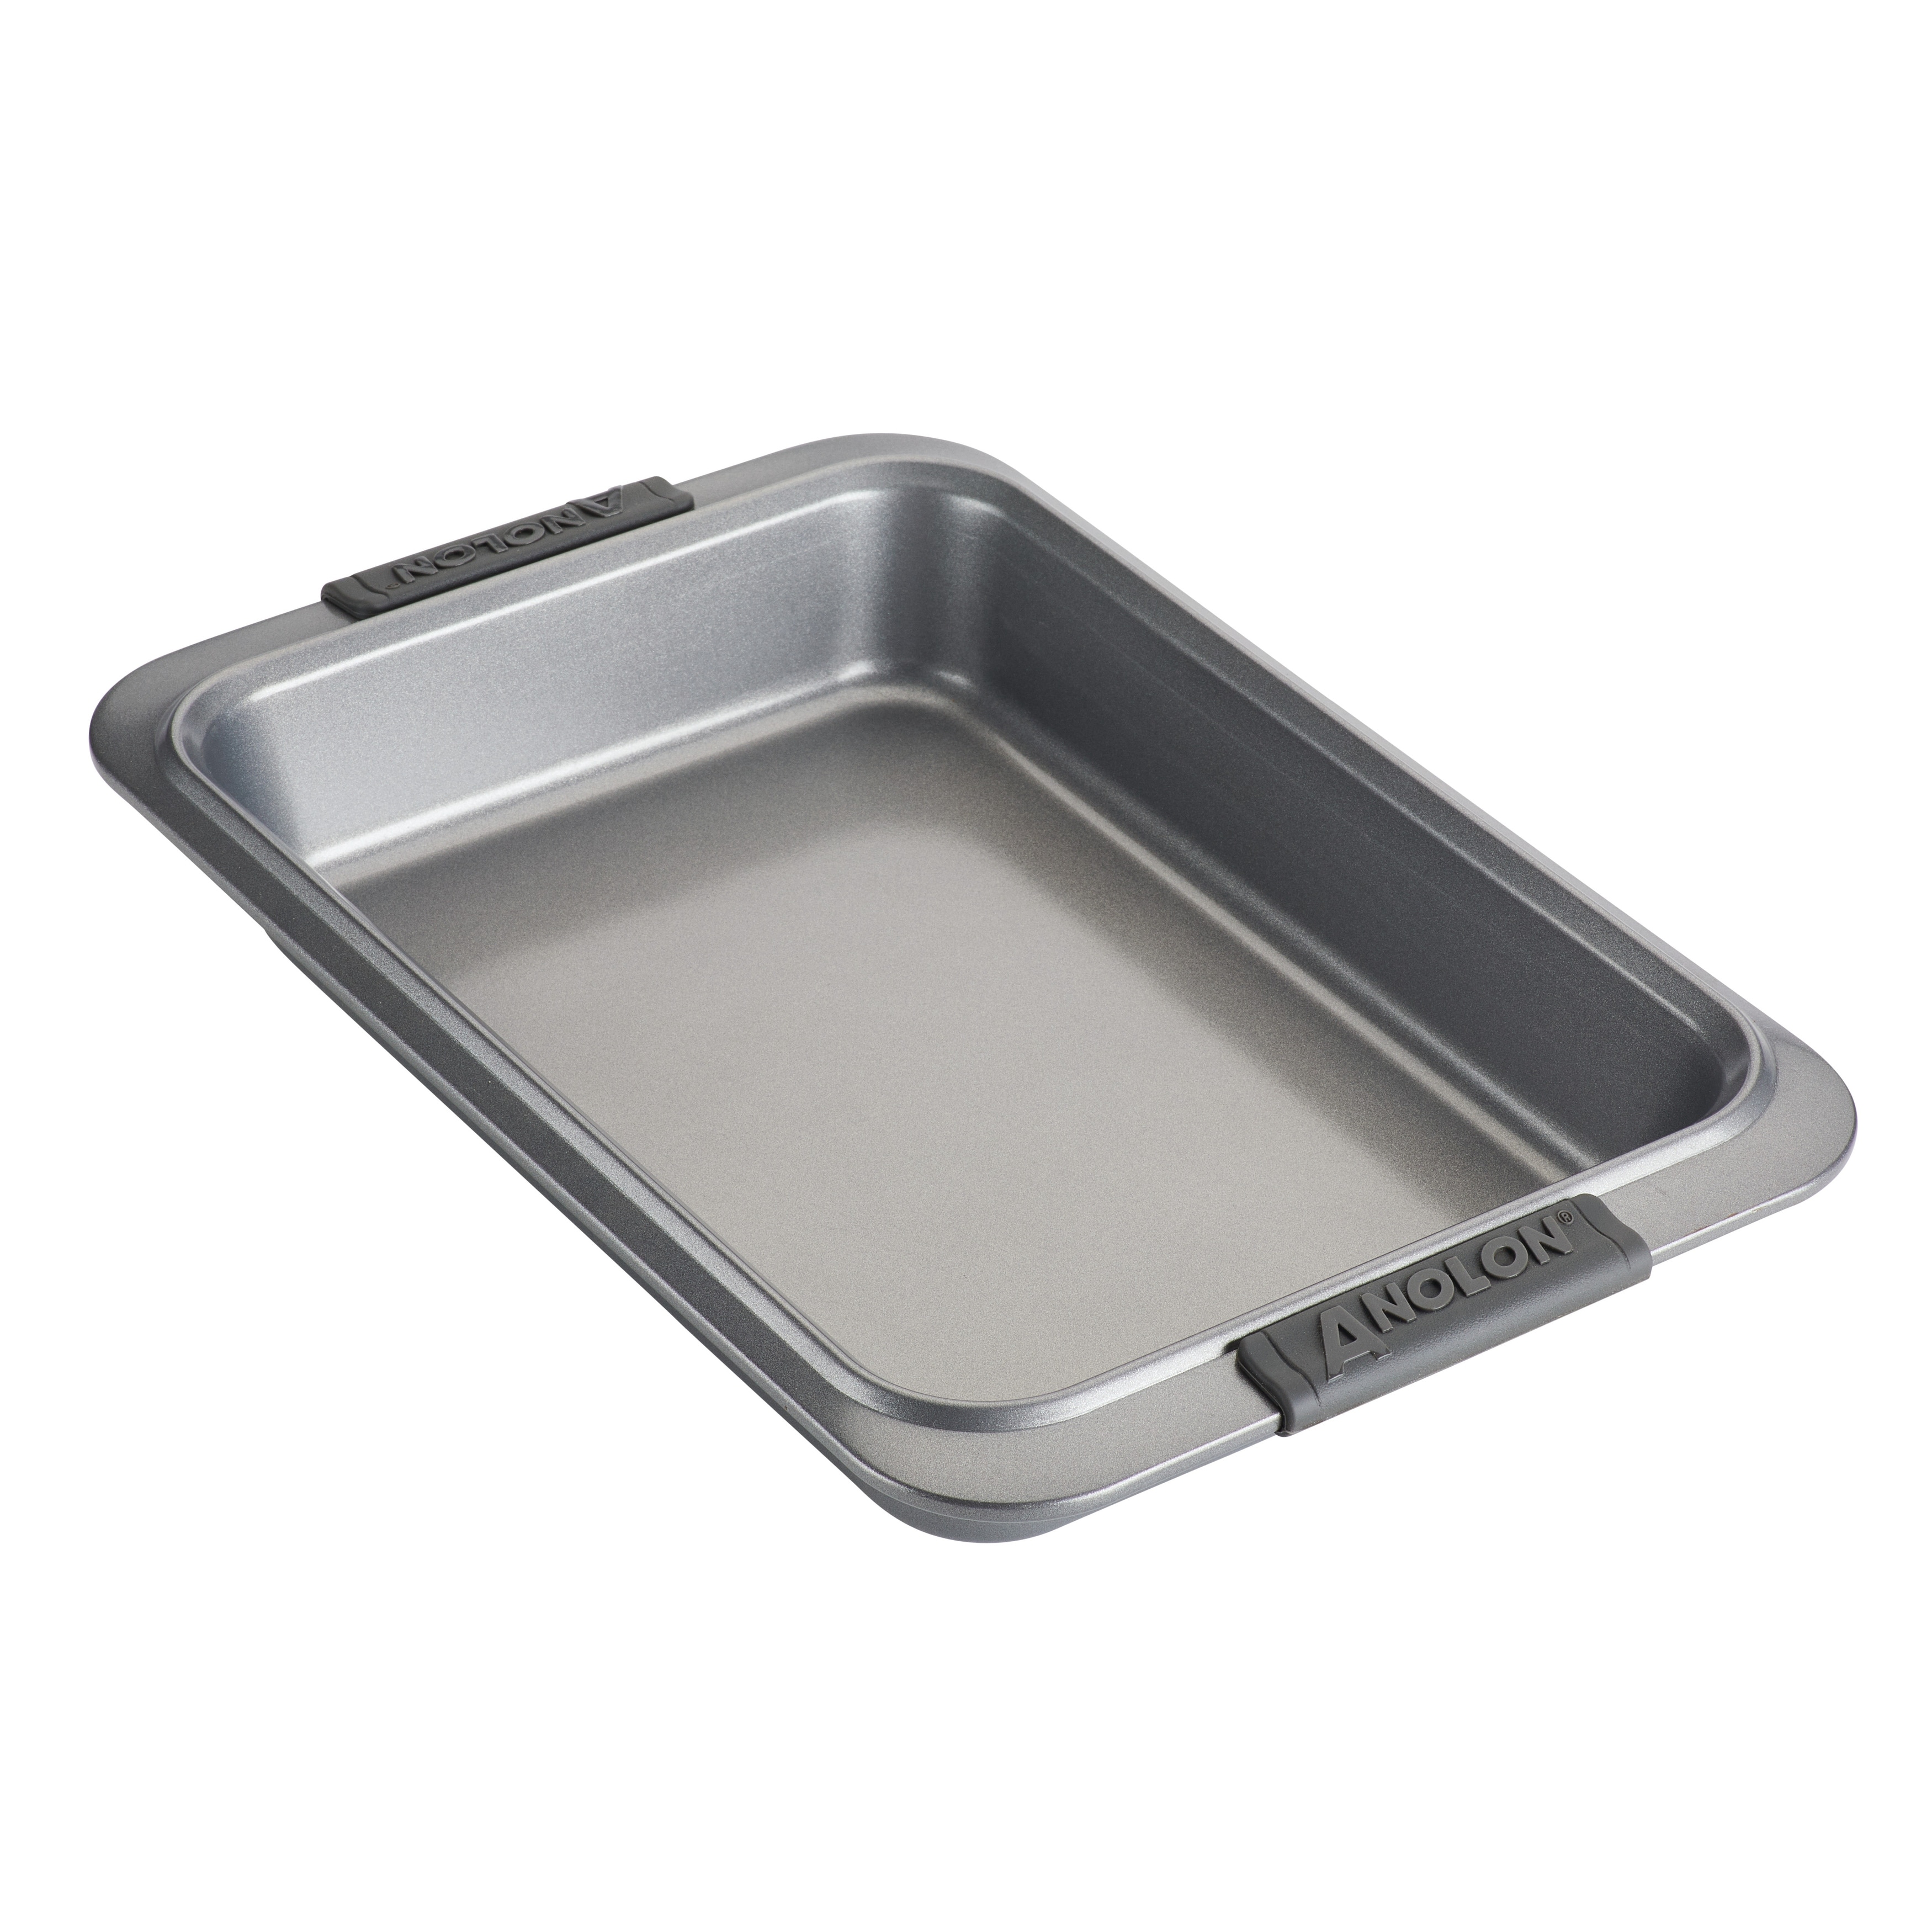 Anolon Advanced Nonstick Baking Pan With Lid / Nonstick Cake Pan With Lid,  Rectangle - 9 Inch x 13 Inch, Gray